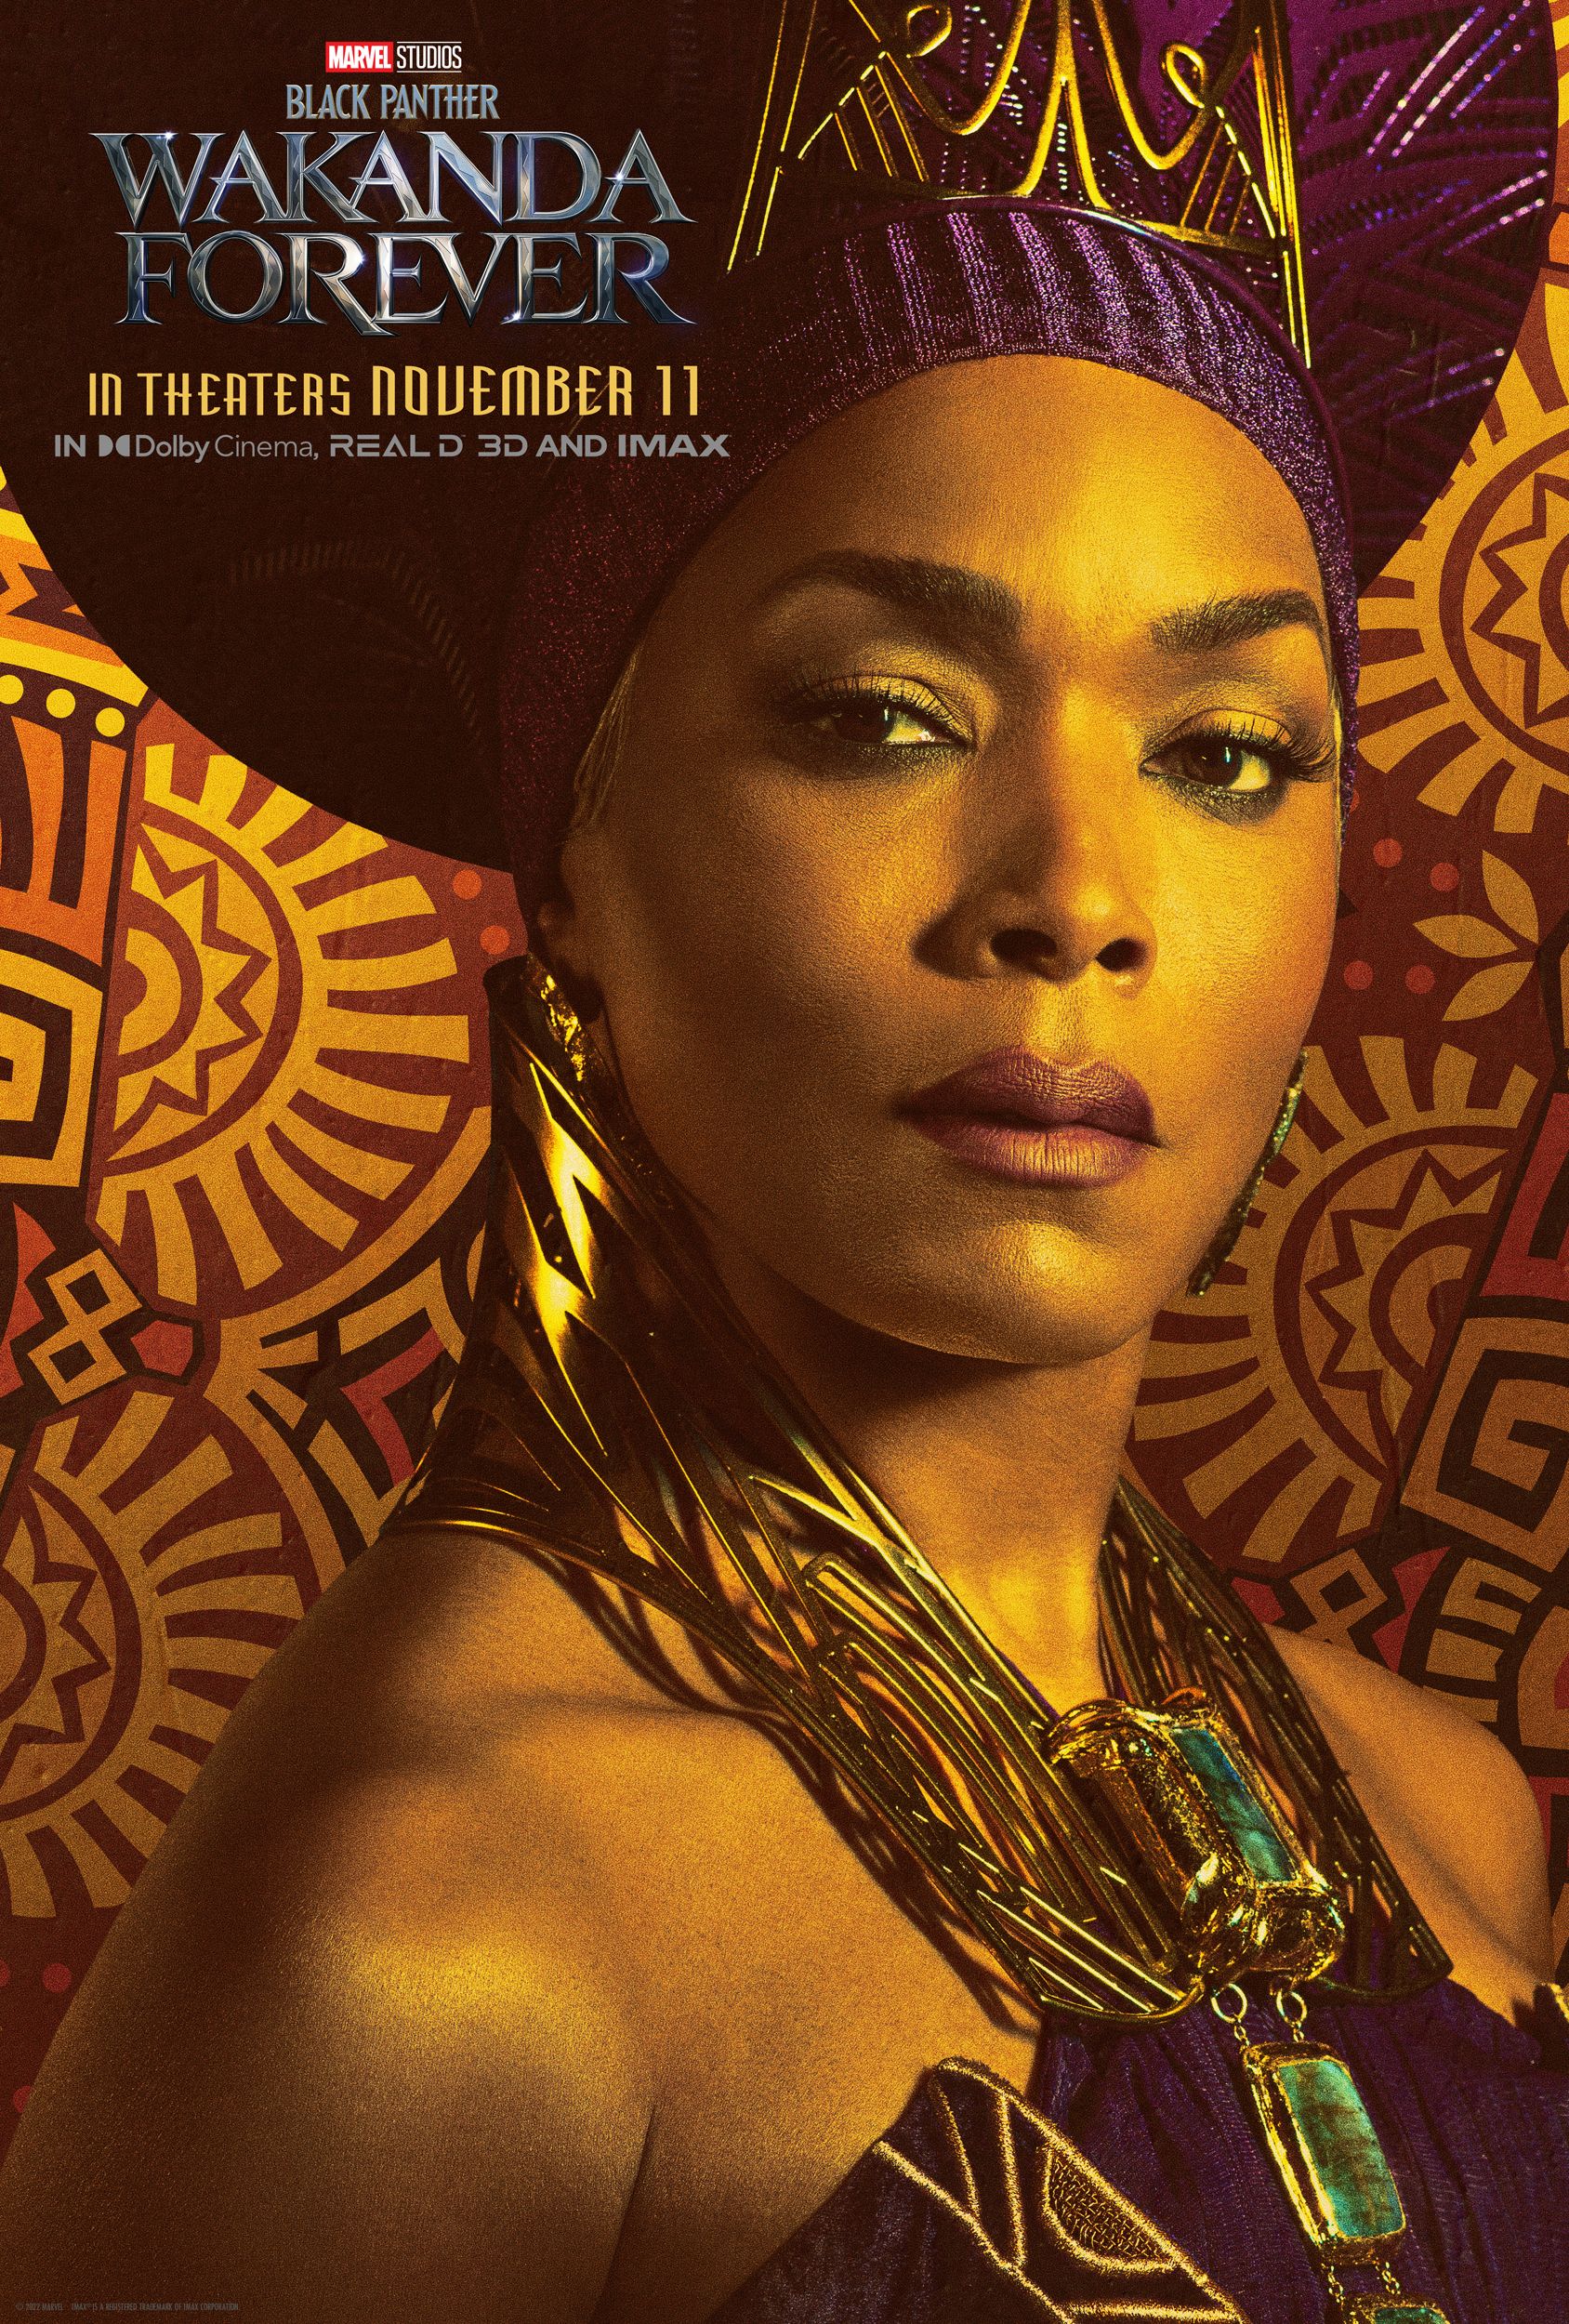 Angela Bassett in a poster for Black Panther: Wakanda Forever